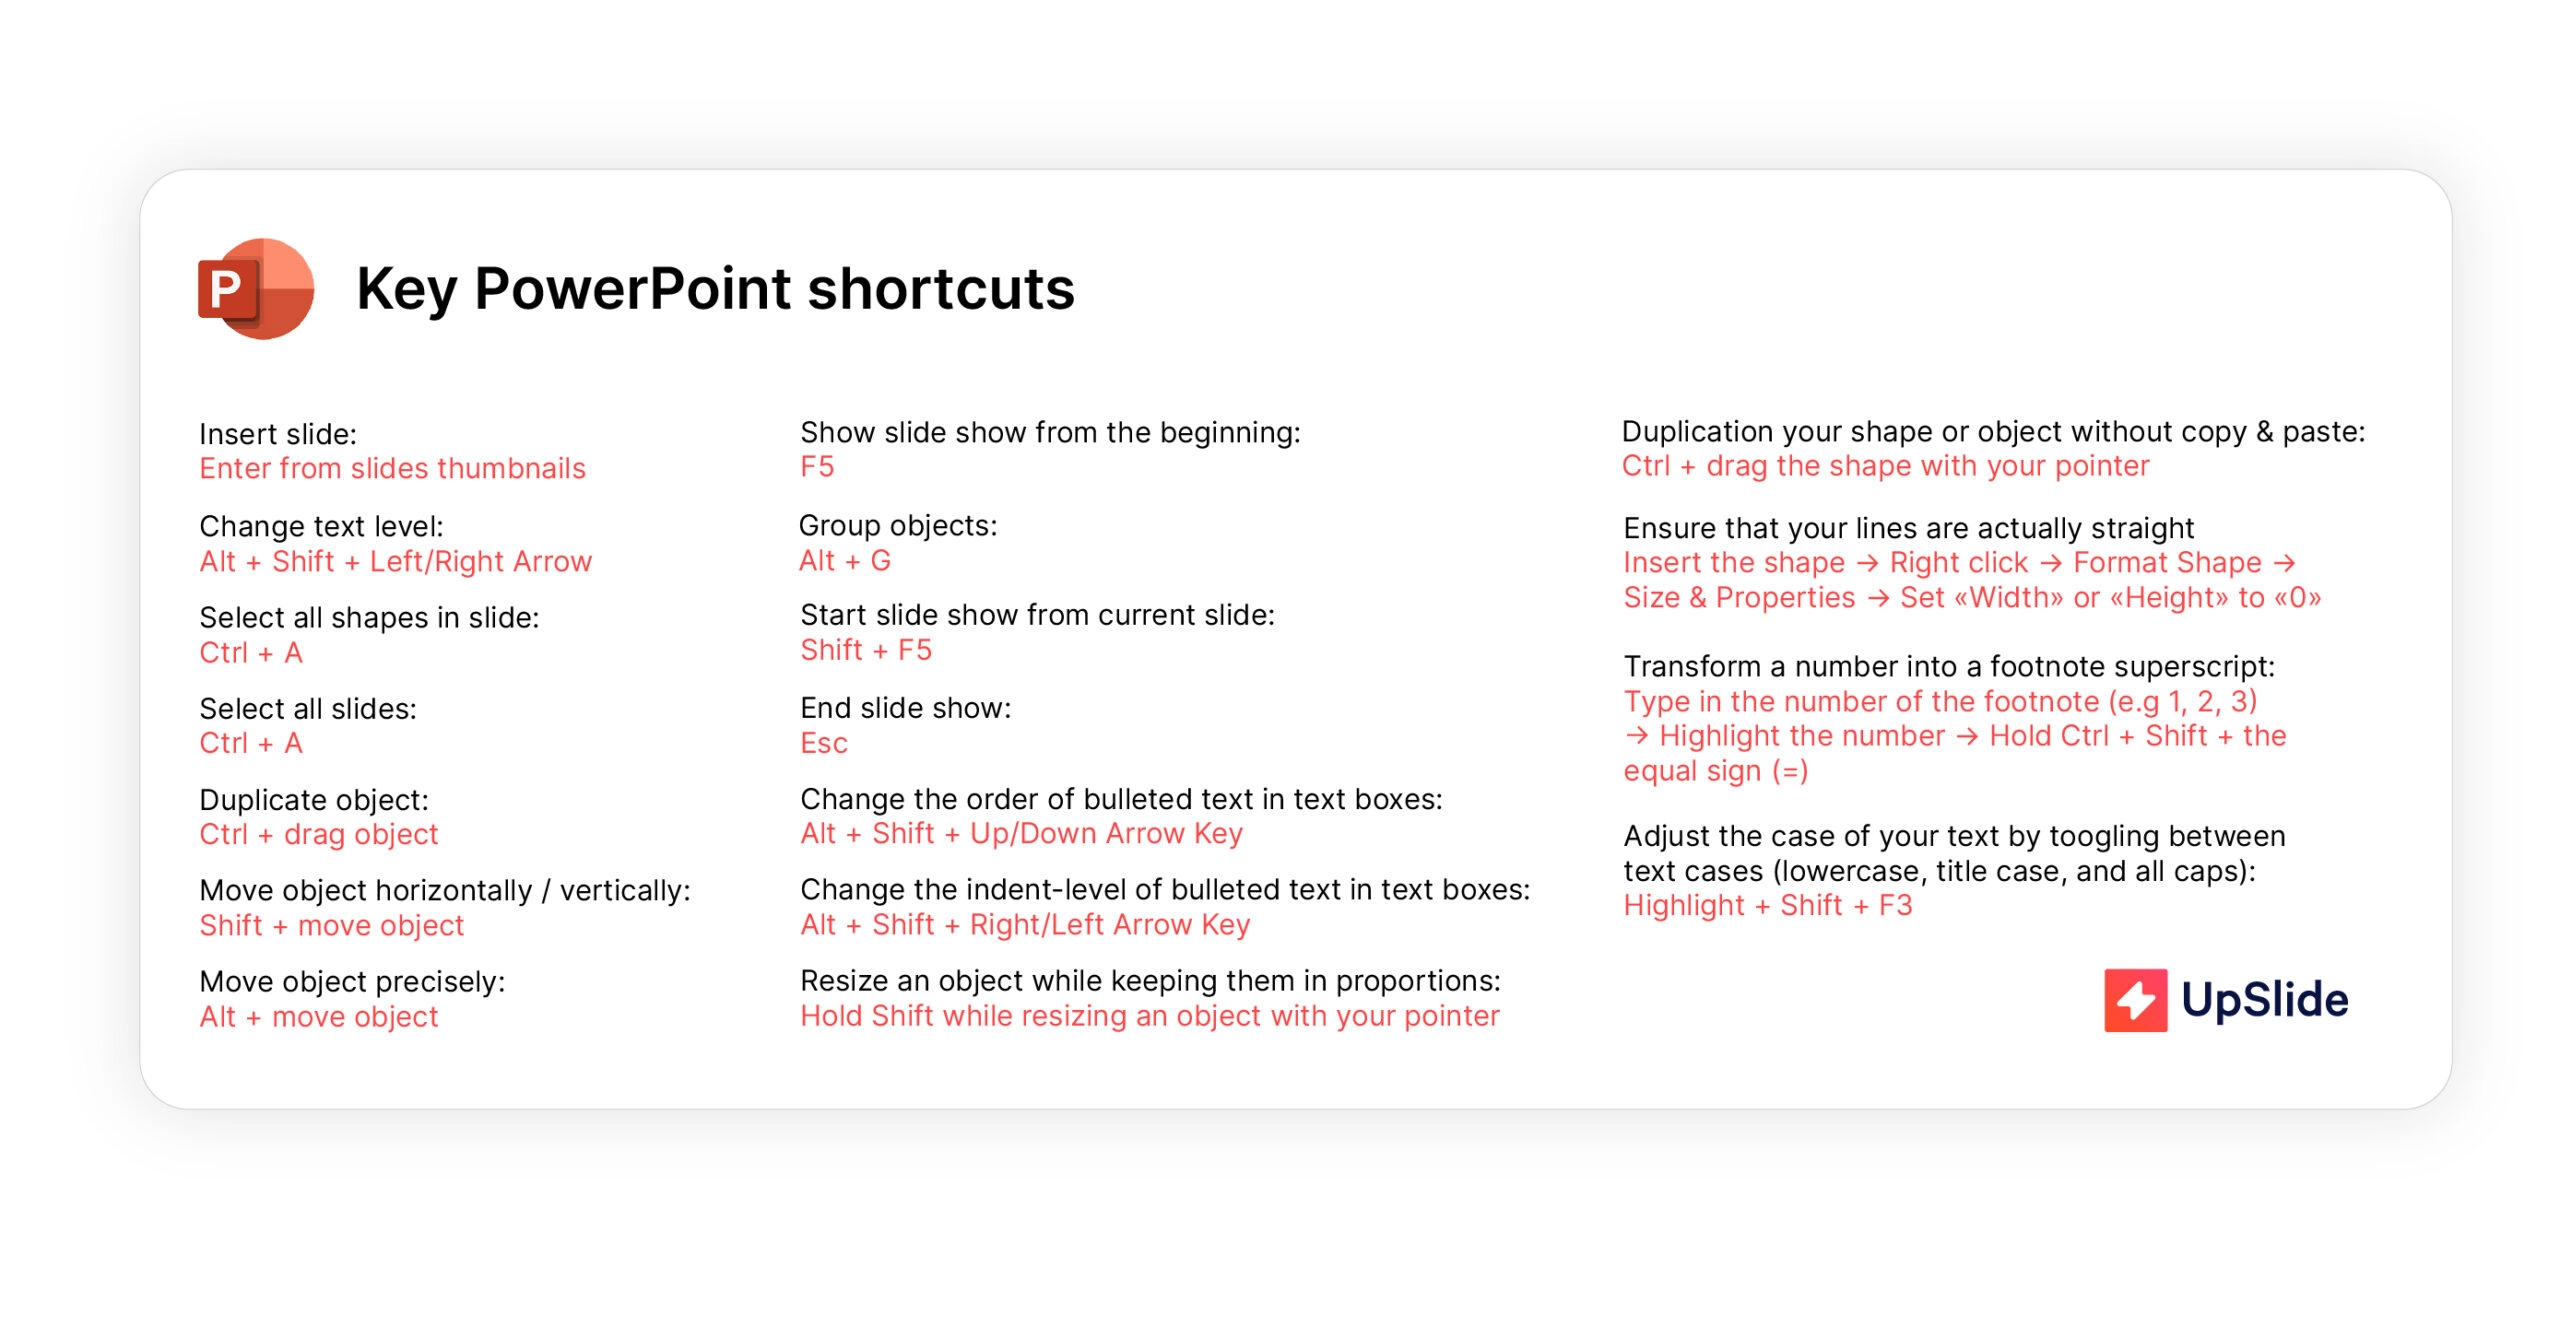 A list of PowerPoint shortcuts